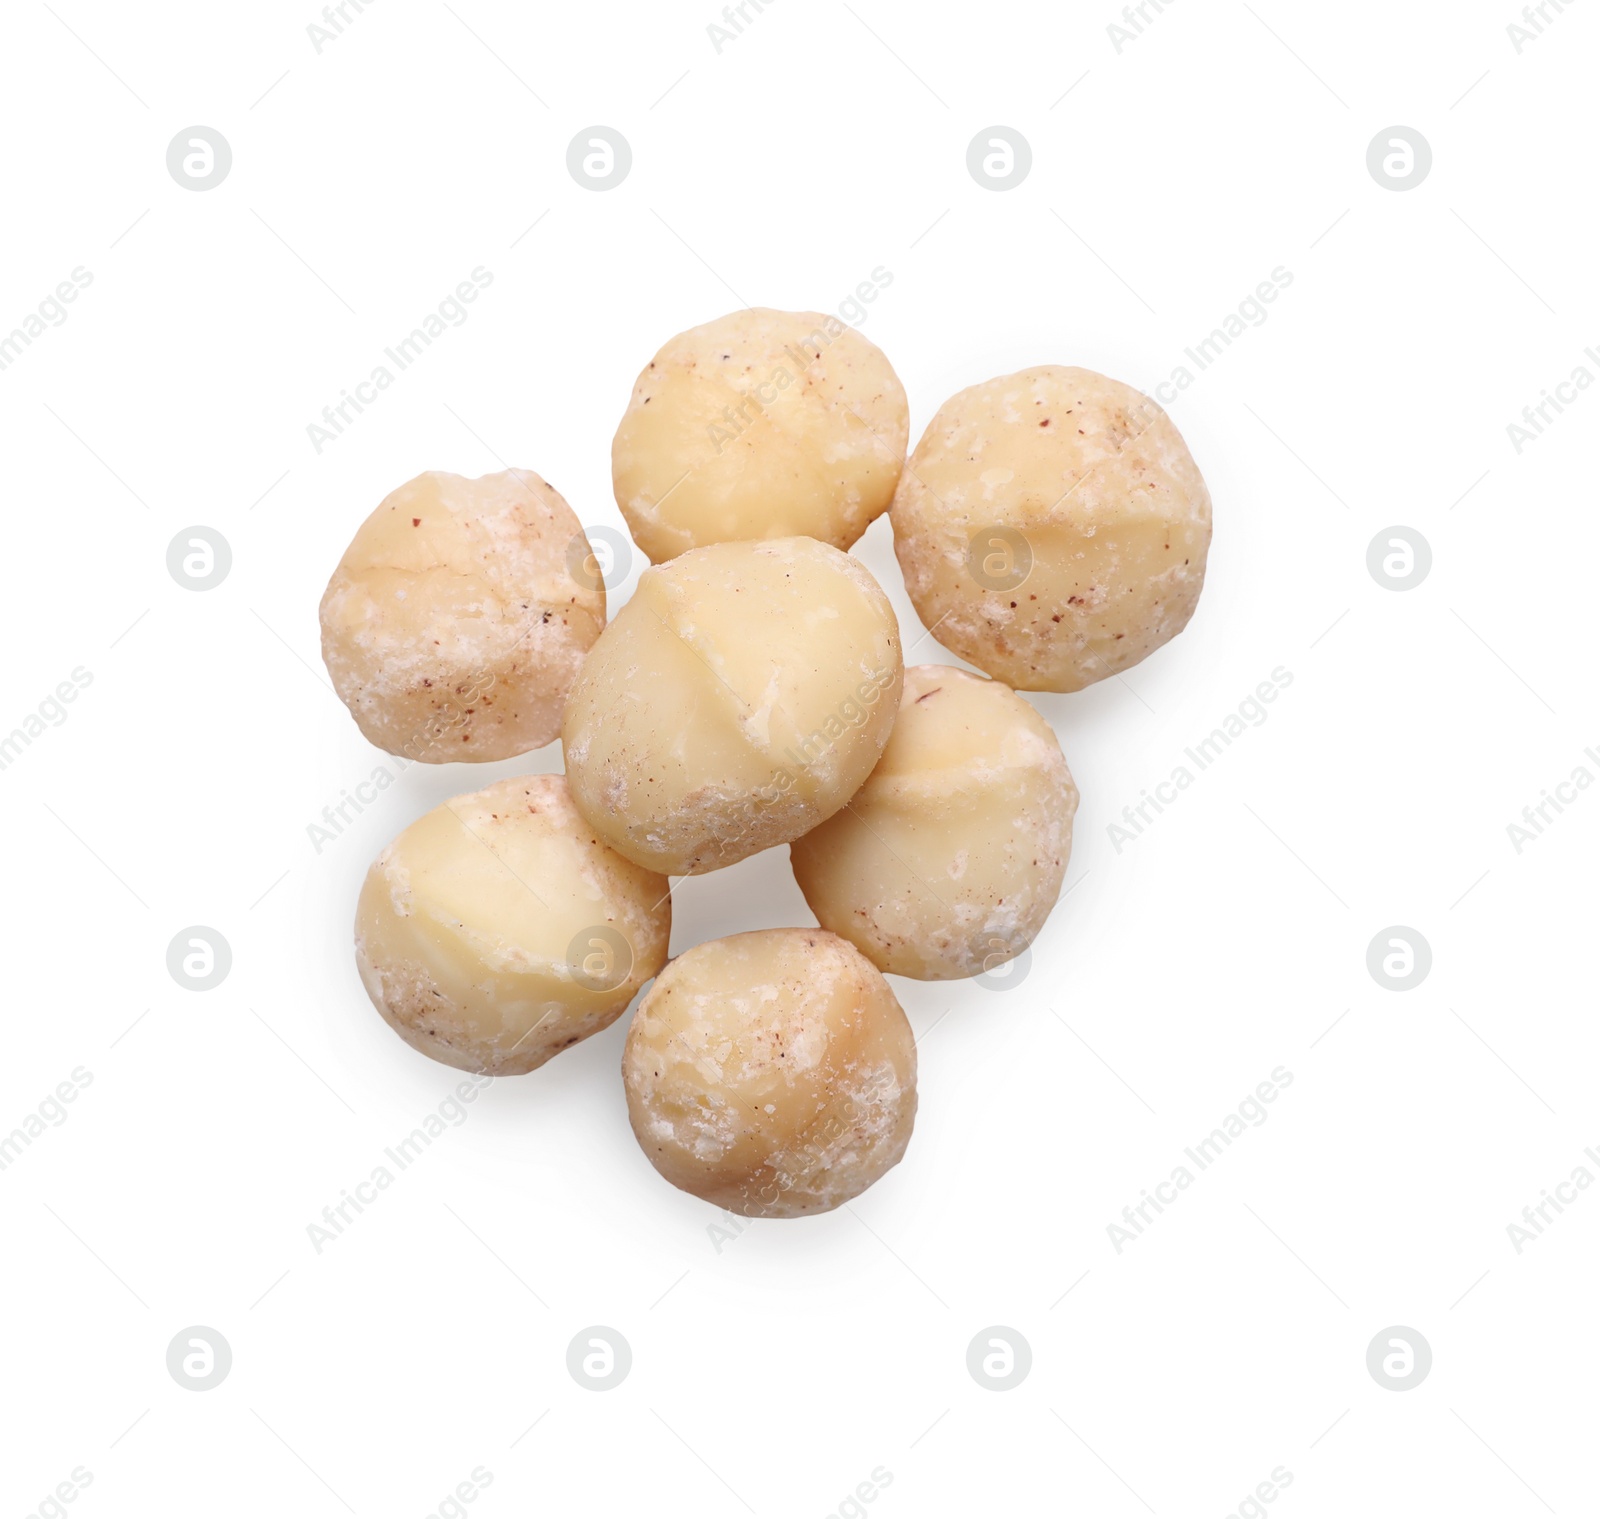 Photo of Delicious shelled Macadamia nuts isolated on white, top view